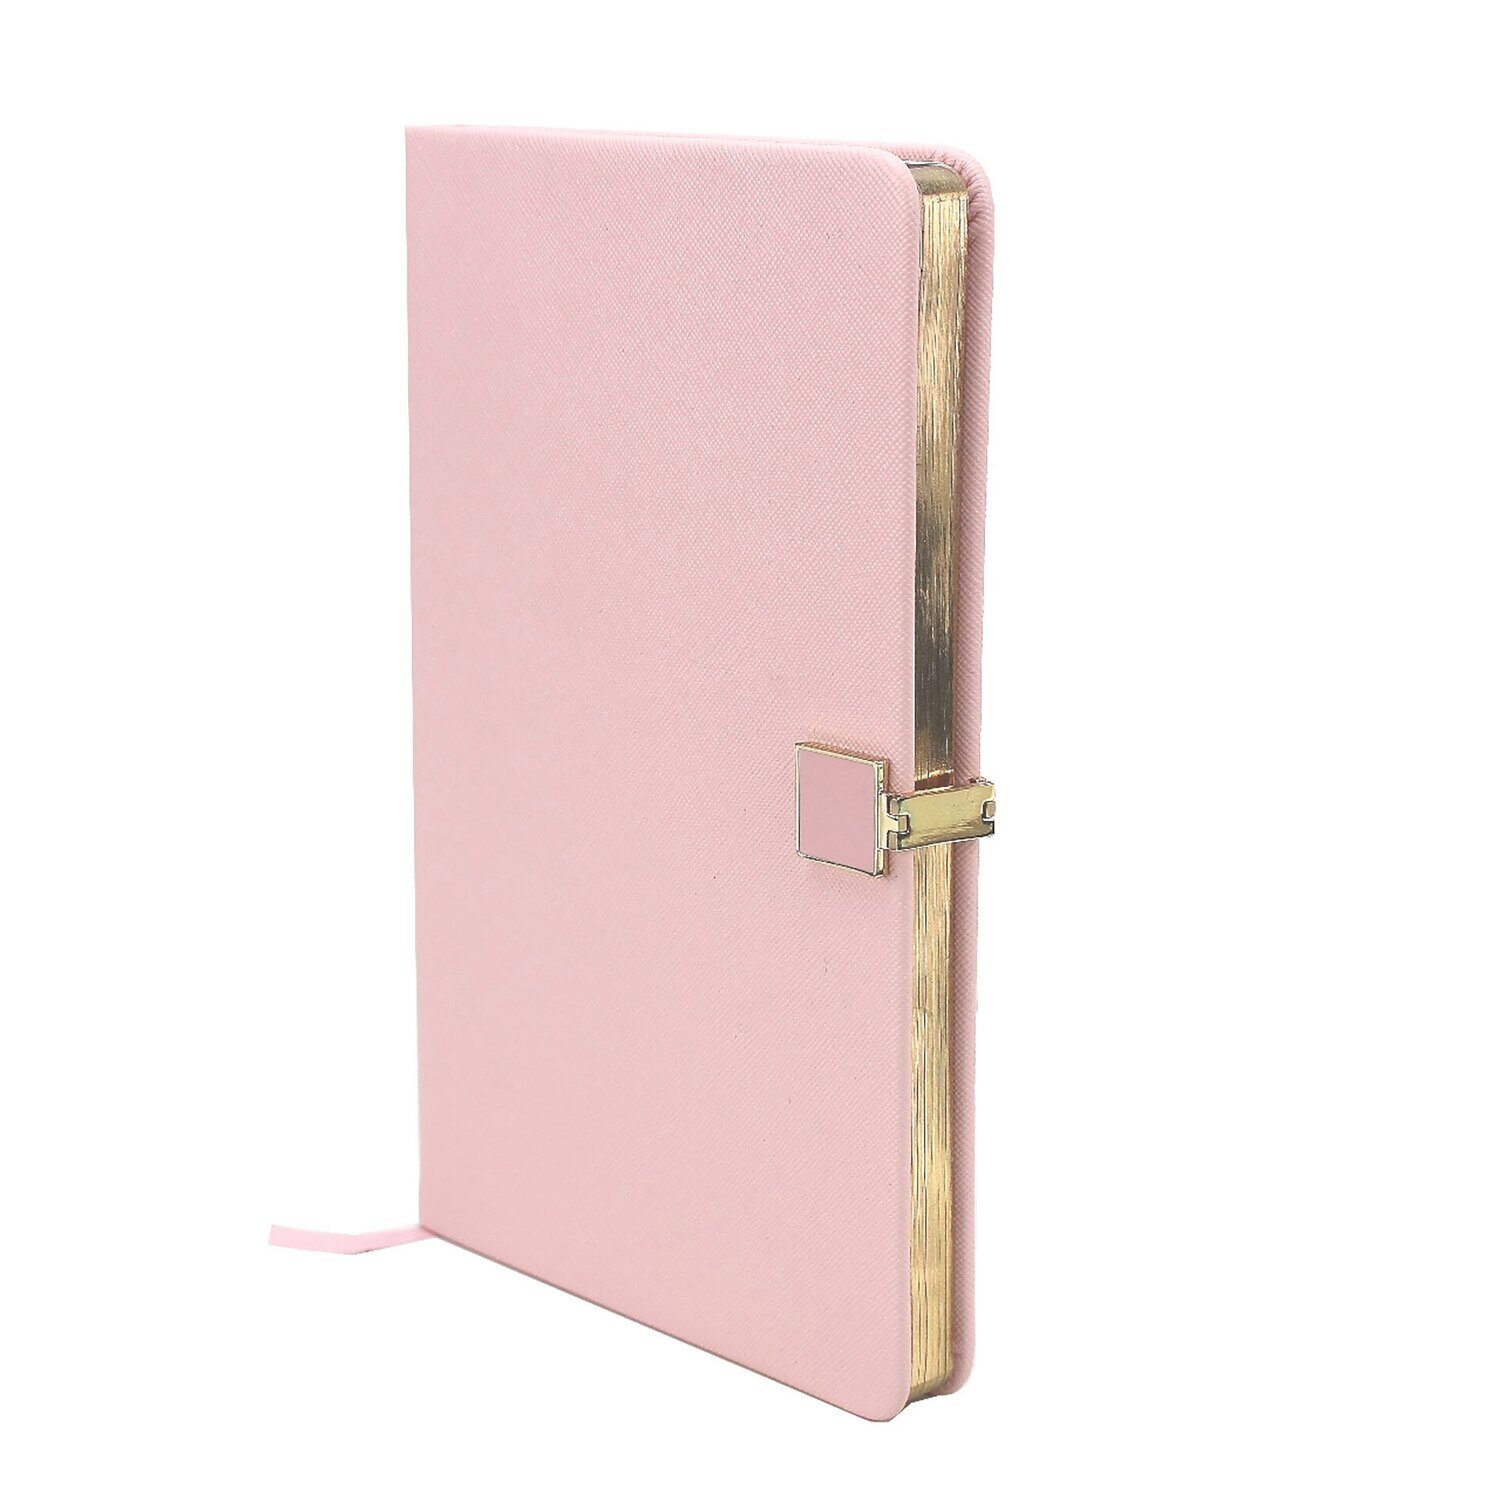 Addison Ross Pink & Gold Notebook A5 Inch Pu Leather NB1002